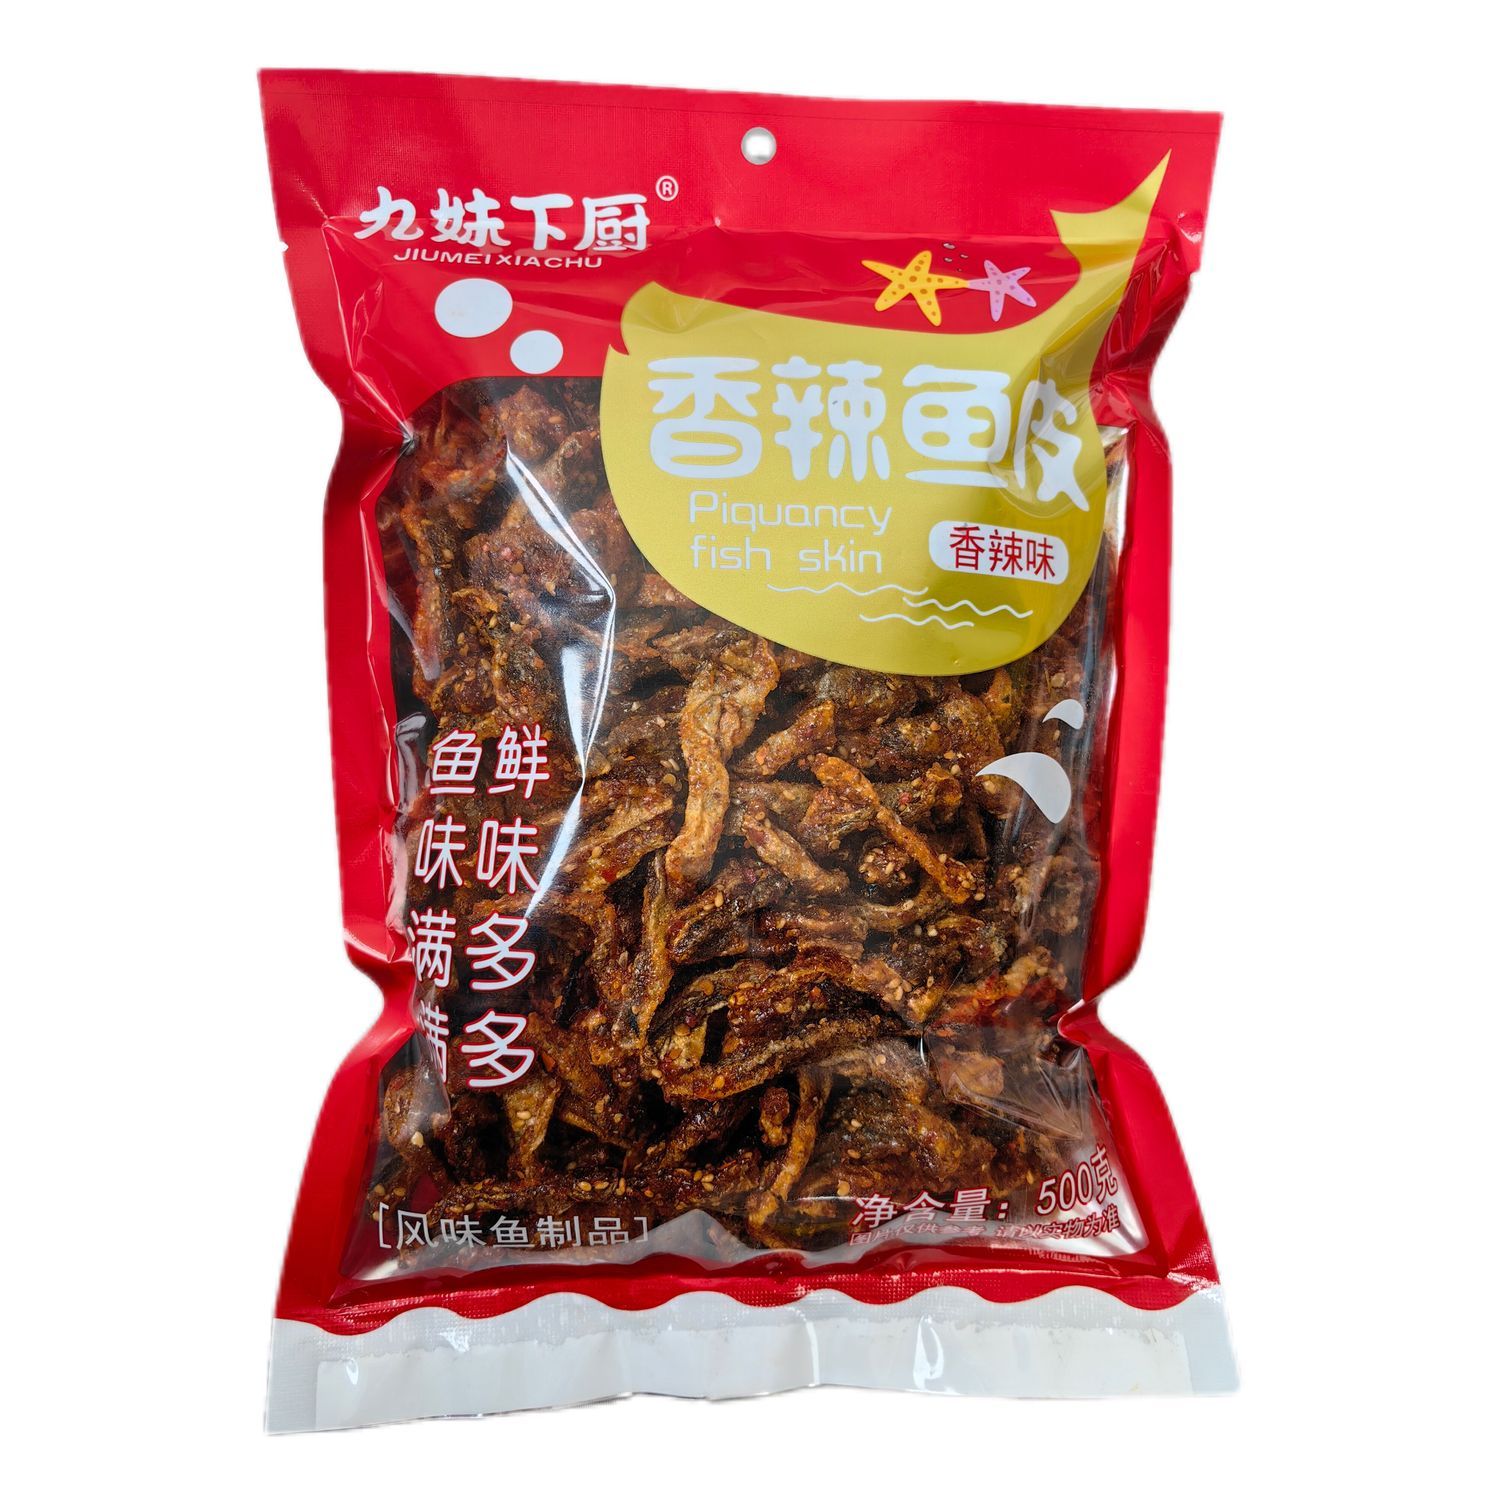 Jiumei cooks sweet and spicy deep-sea fish skin cod fillet snack seafood ready-to-eat bagged crispy snack 500g